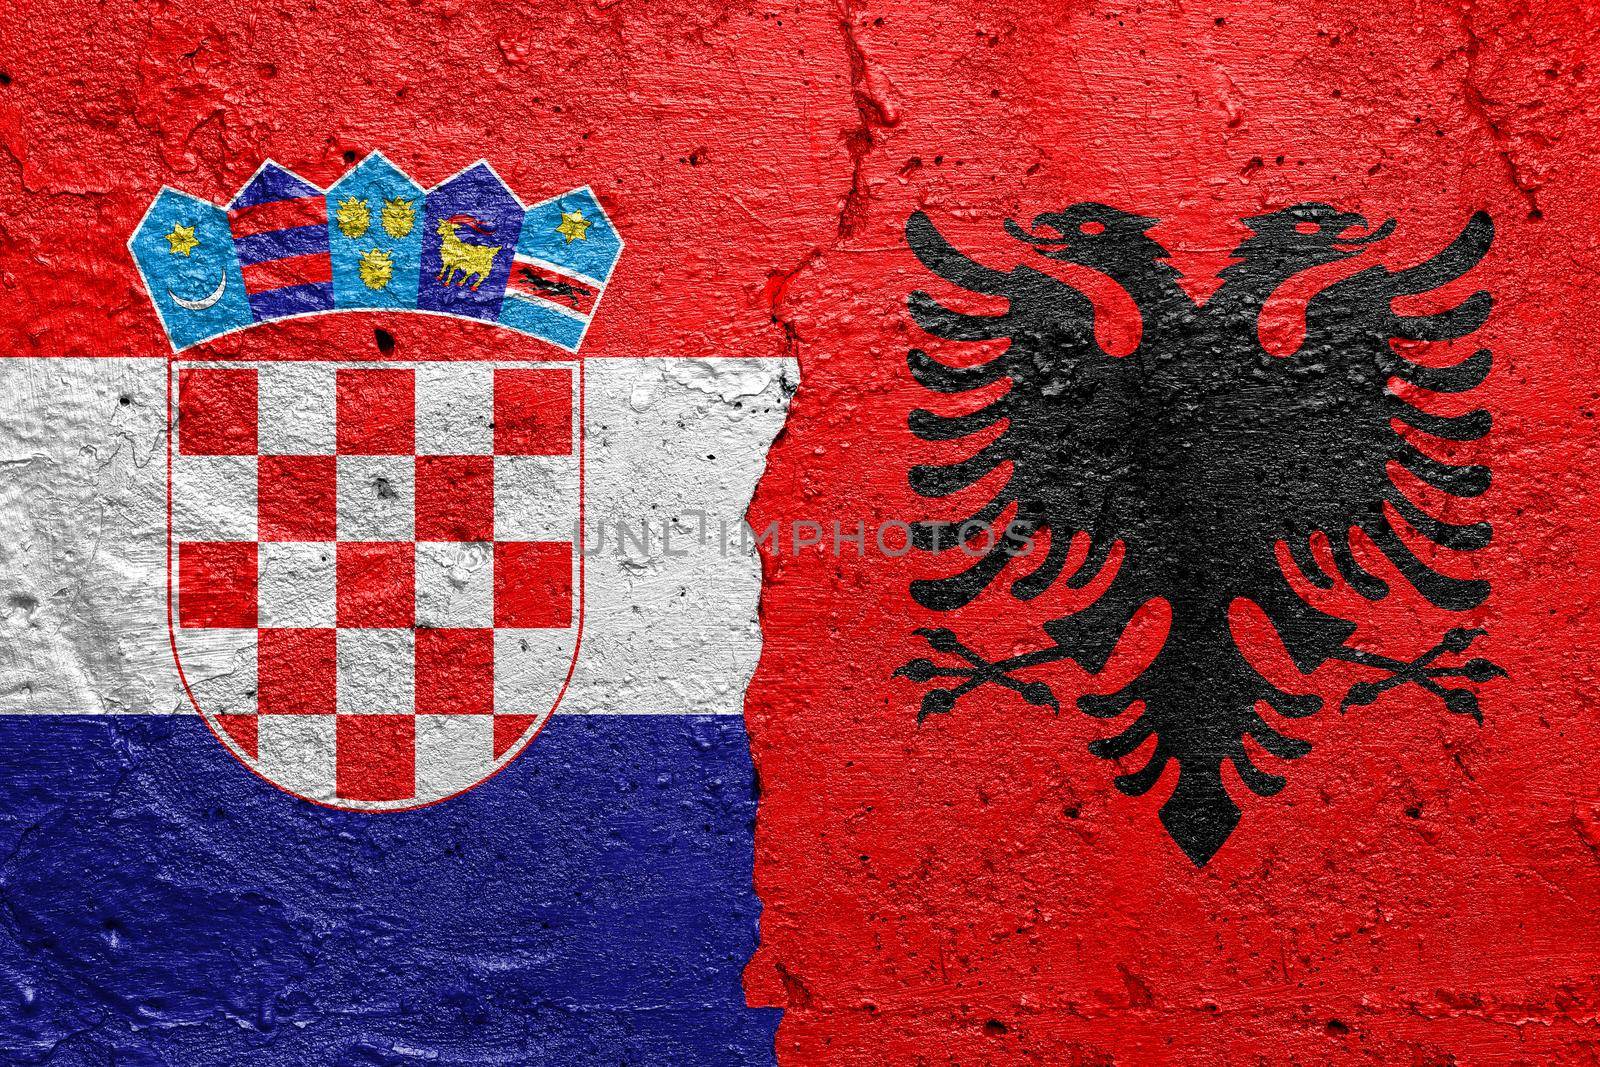 Croatia and Albania - Cracked concrete wall painted with a Croatian flag on the left and a Albanian flag on the right